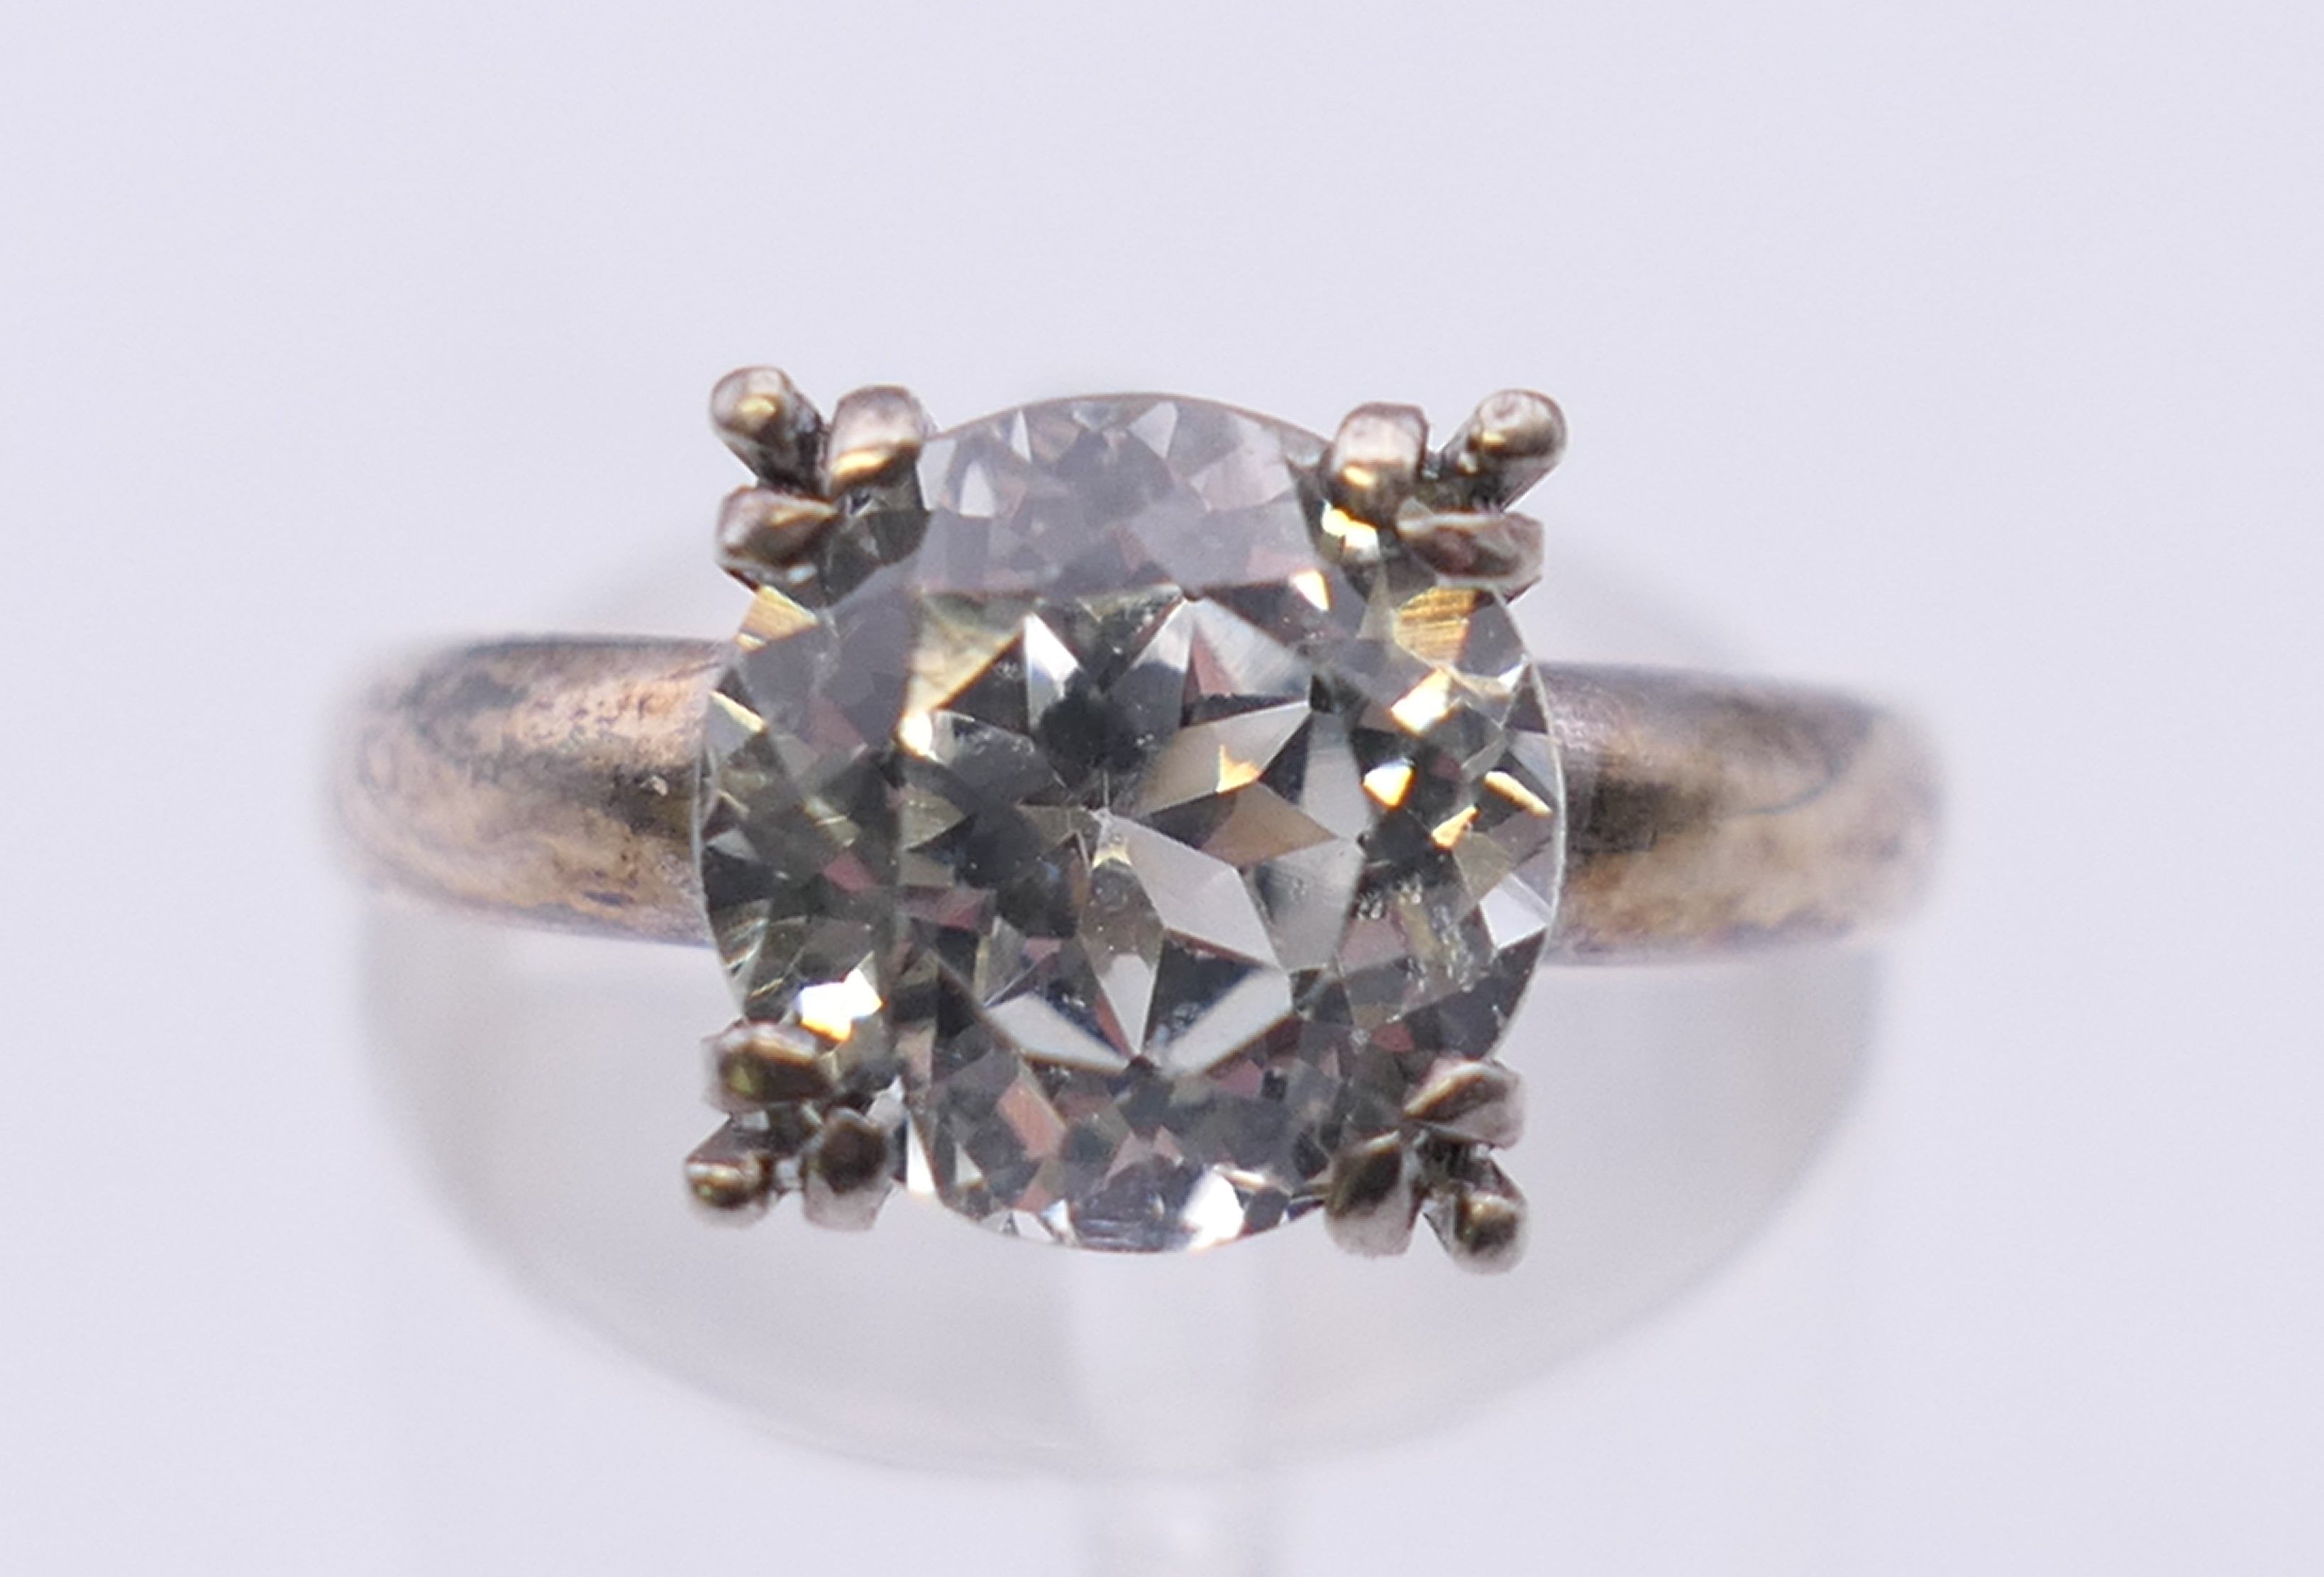 An unmarked solitaire ring, possibly white sapphire. Ring size M/N.